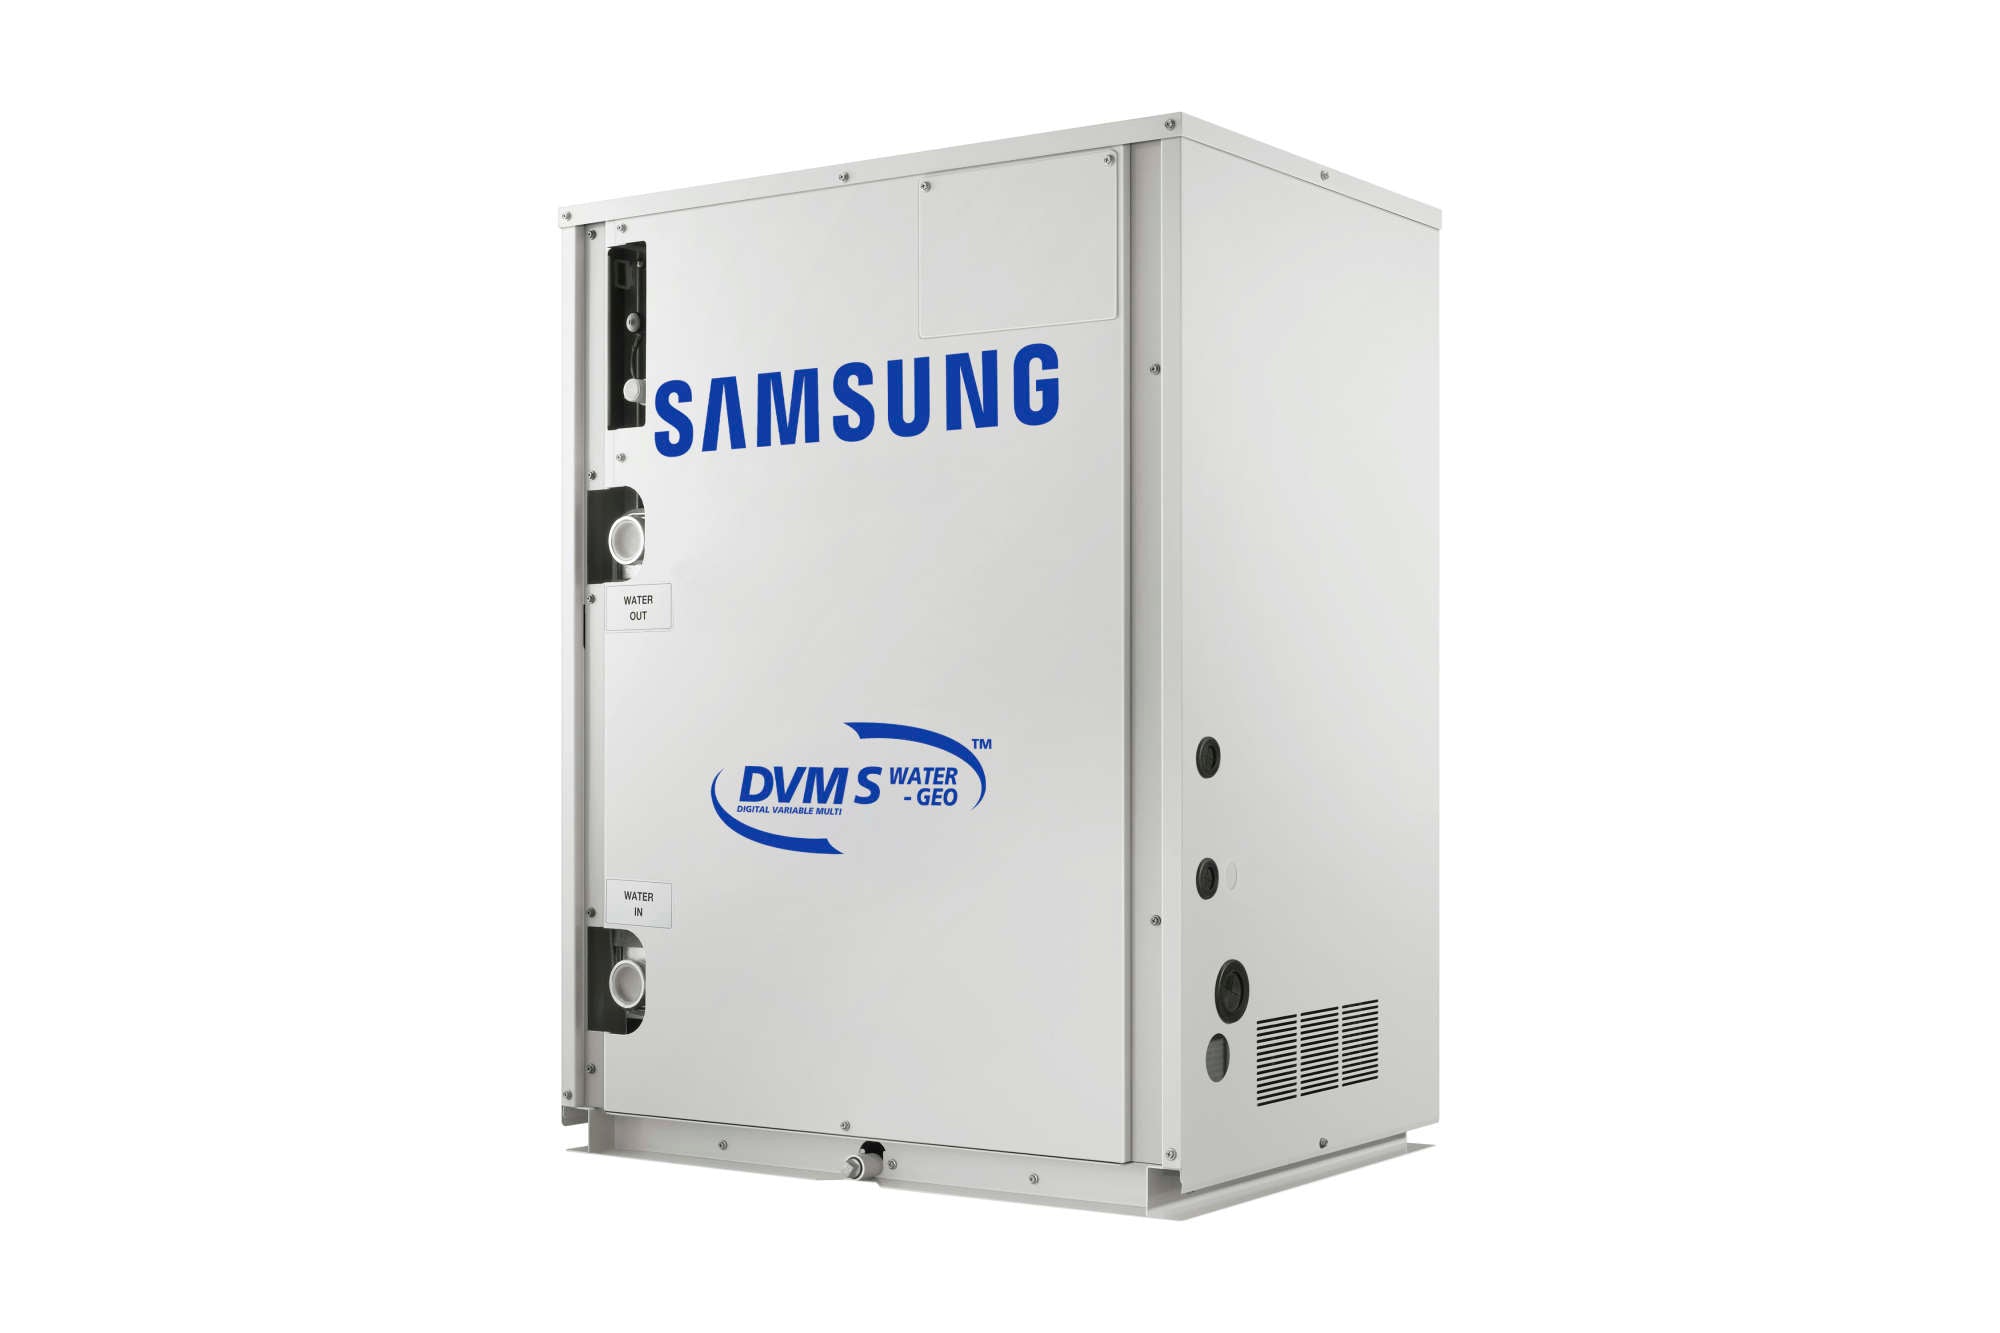 Samsung AM120HXWAFR/AA Air Conditioner DVM S WATER Air Conditioning System